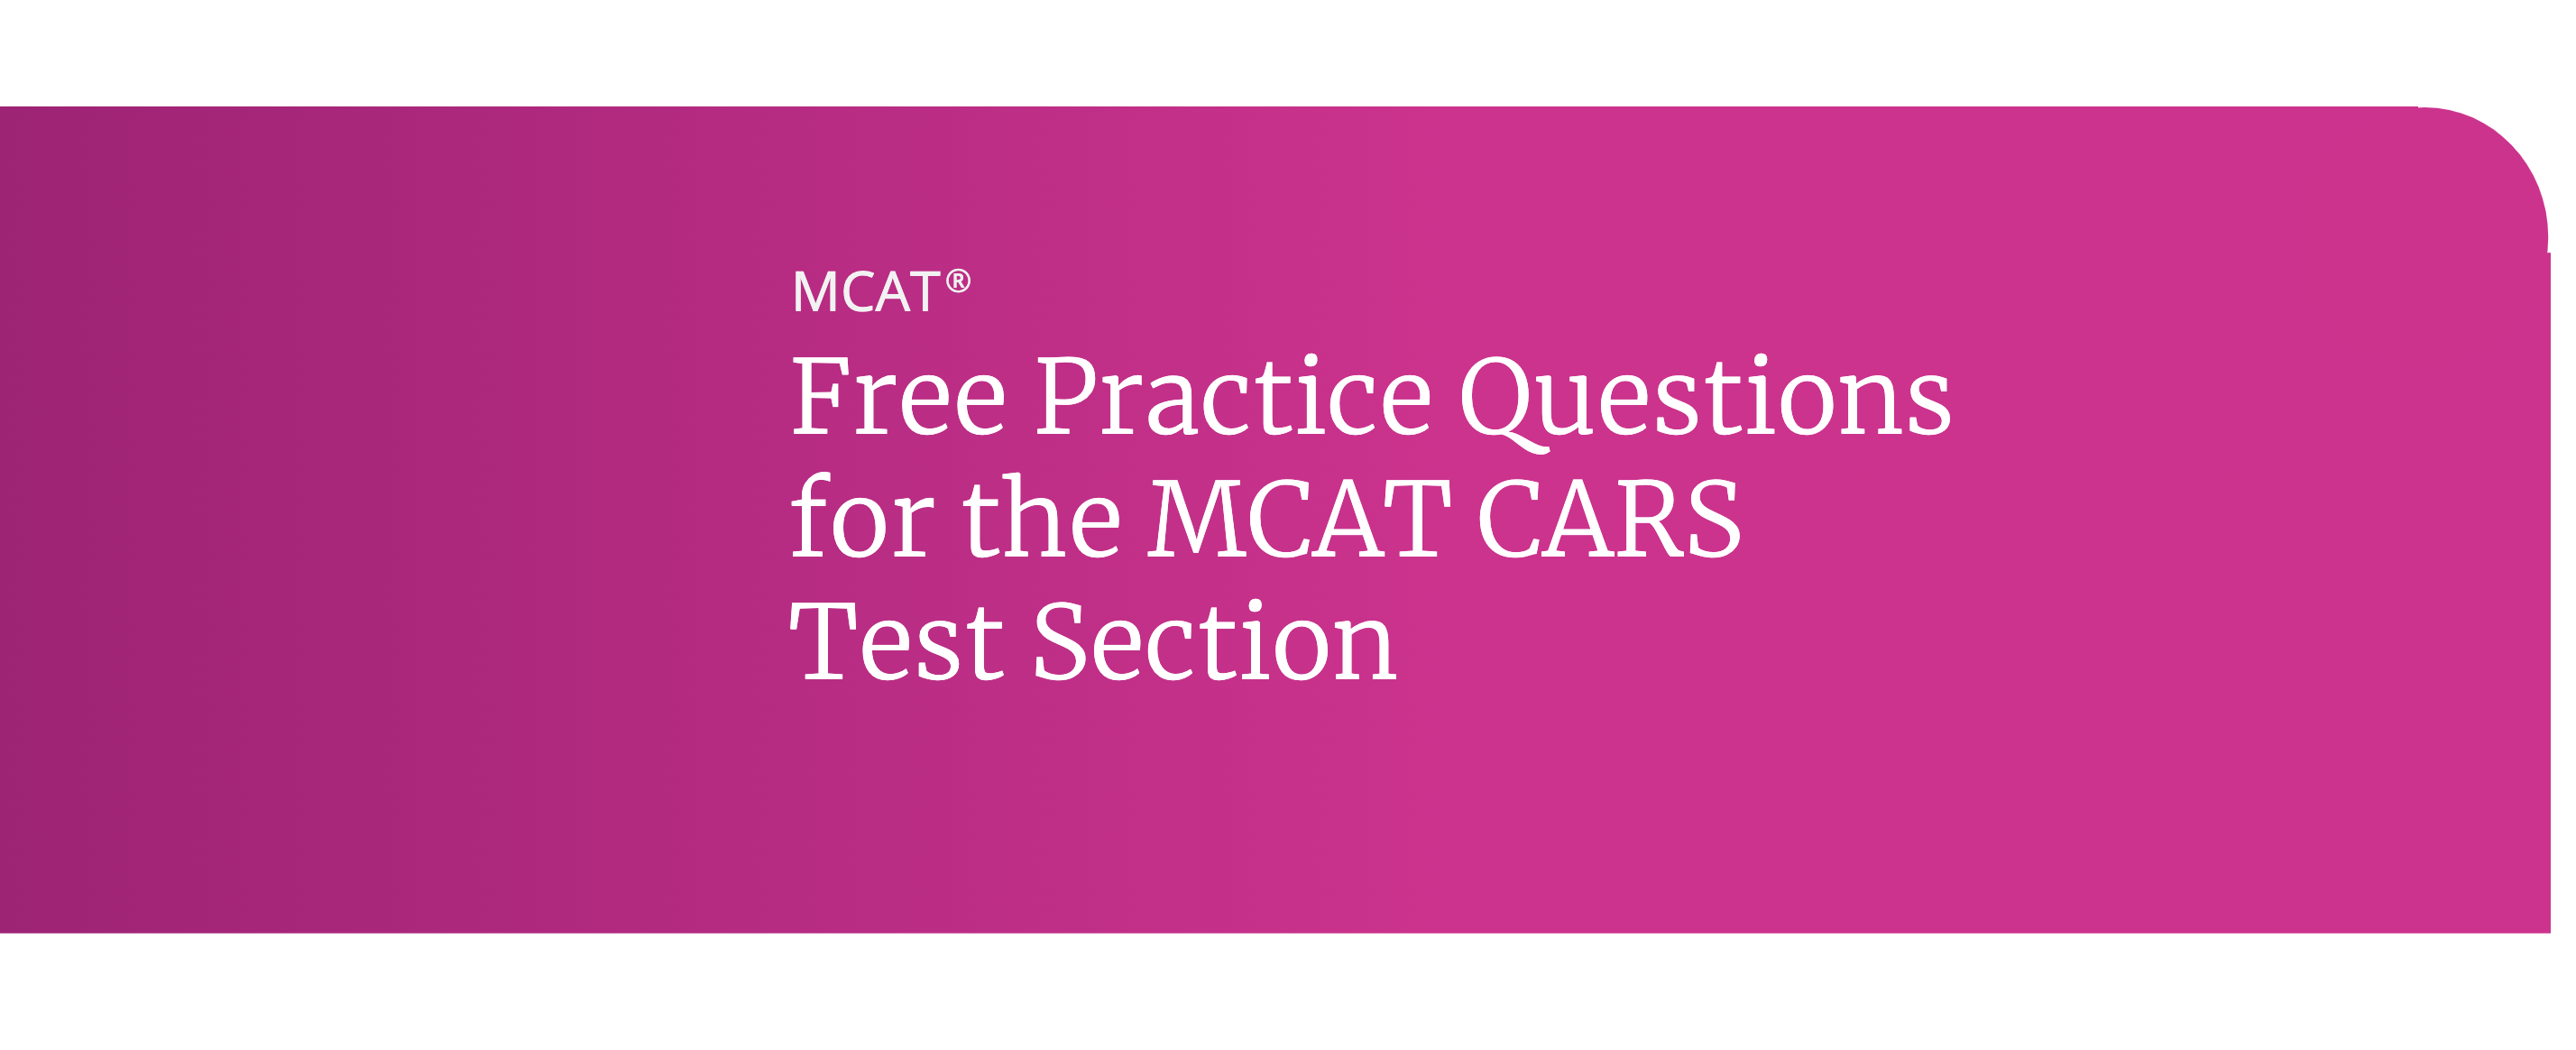 Free practice questions for the MCAT CARS test section. Take our pop quiz.